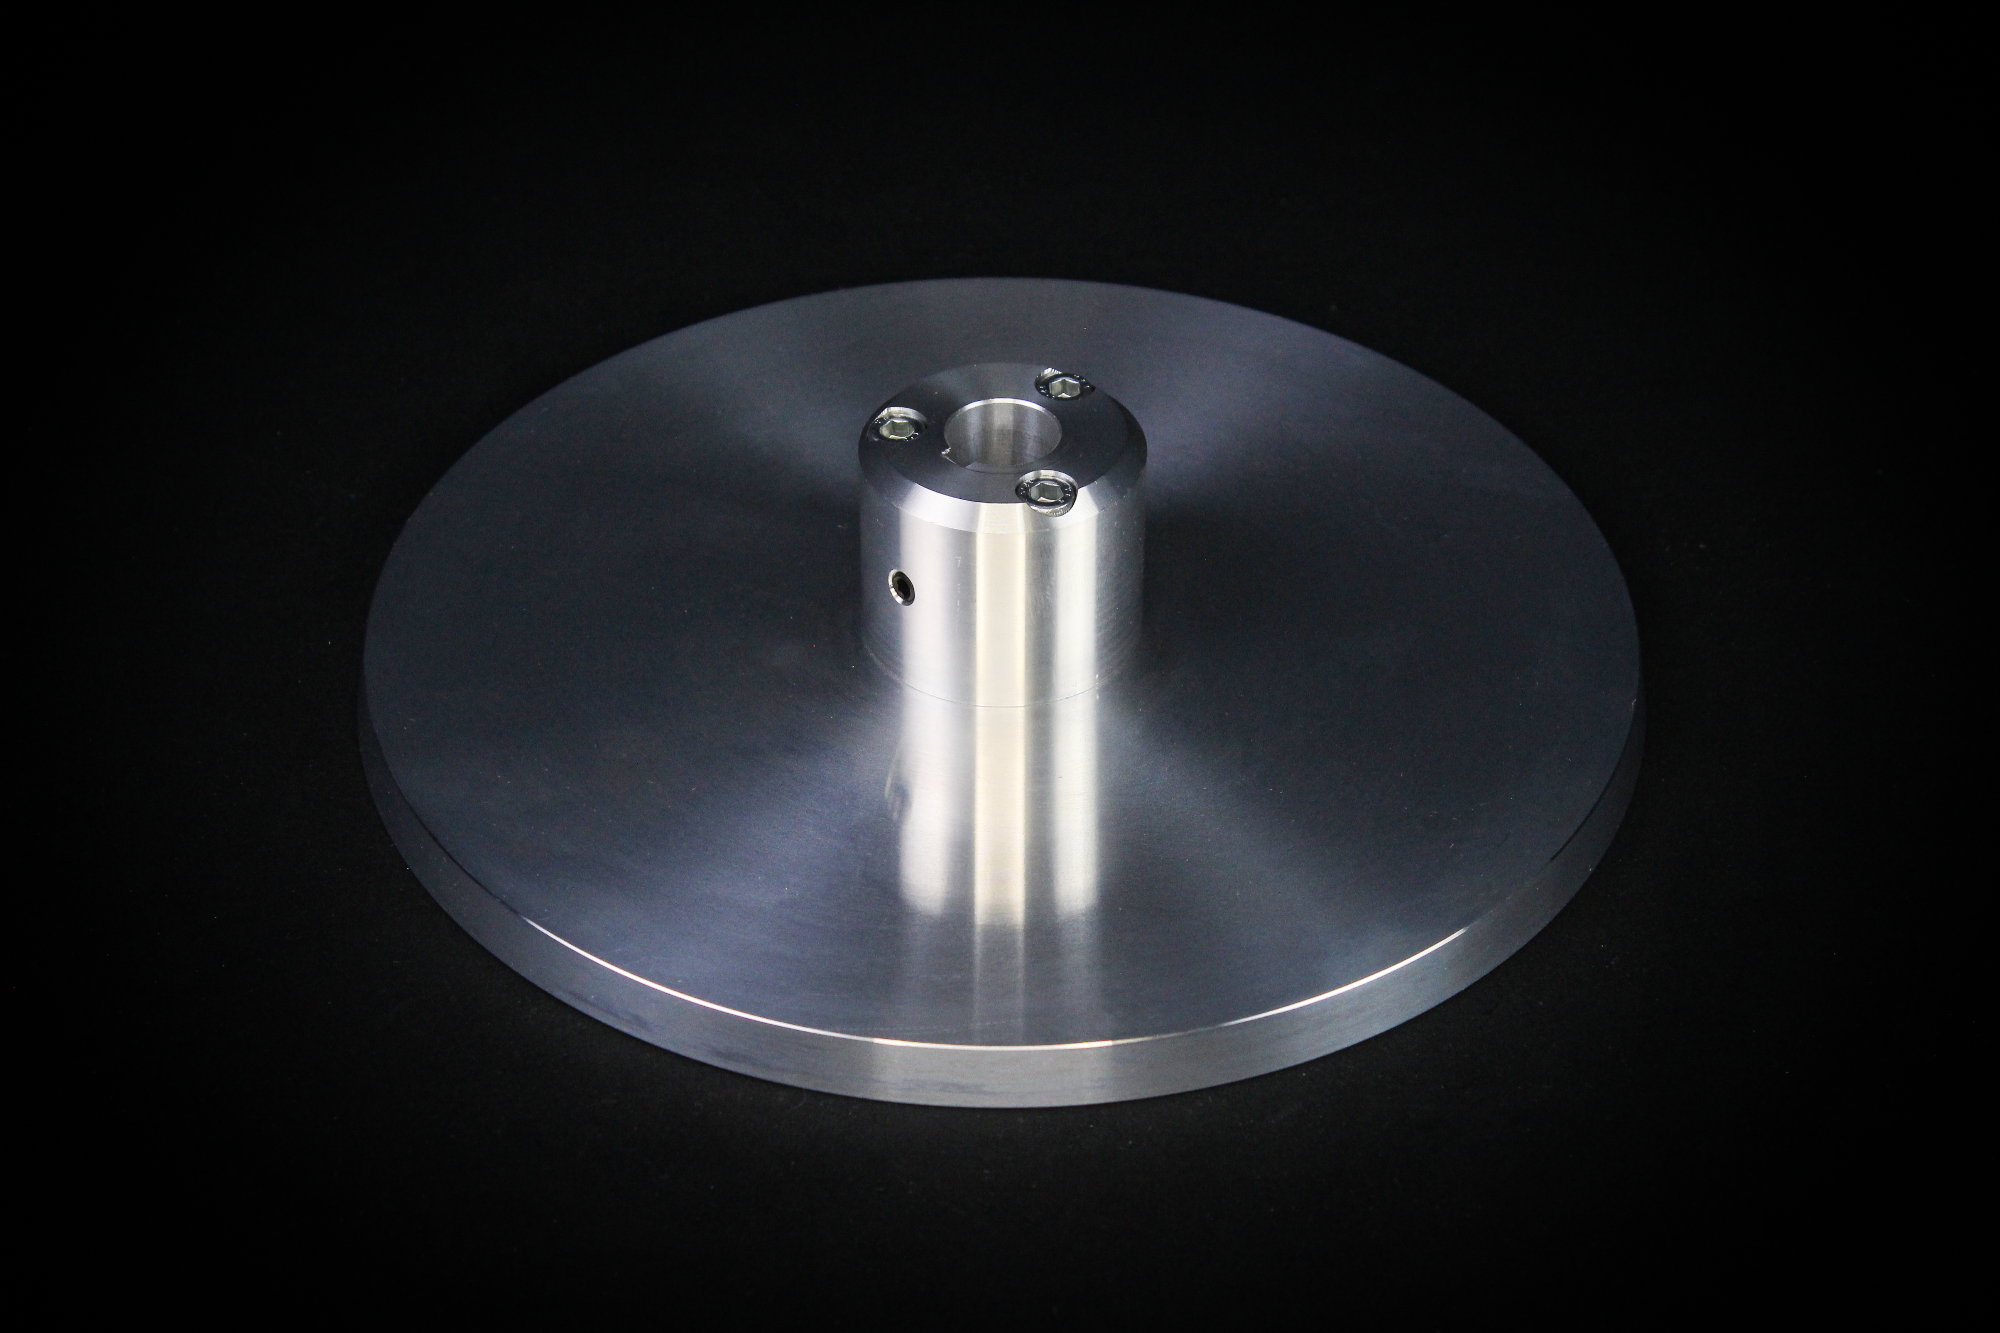 84 Engineering CNC Machined Aluminium Disc for to Suit 19mm or 24mm shaft motor.